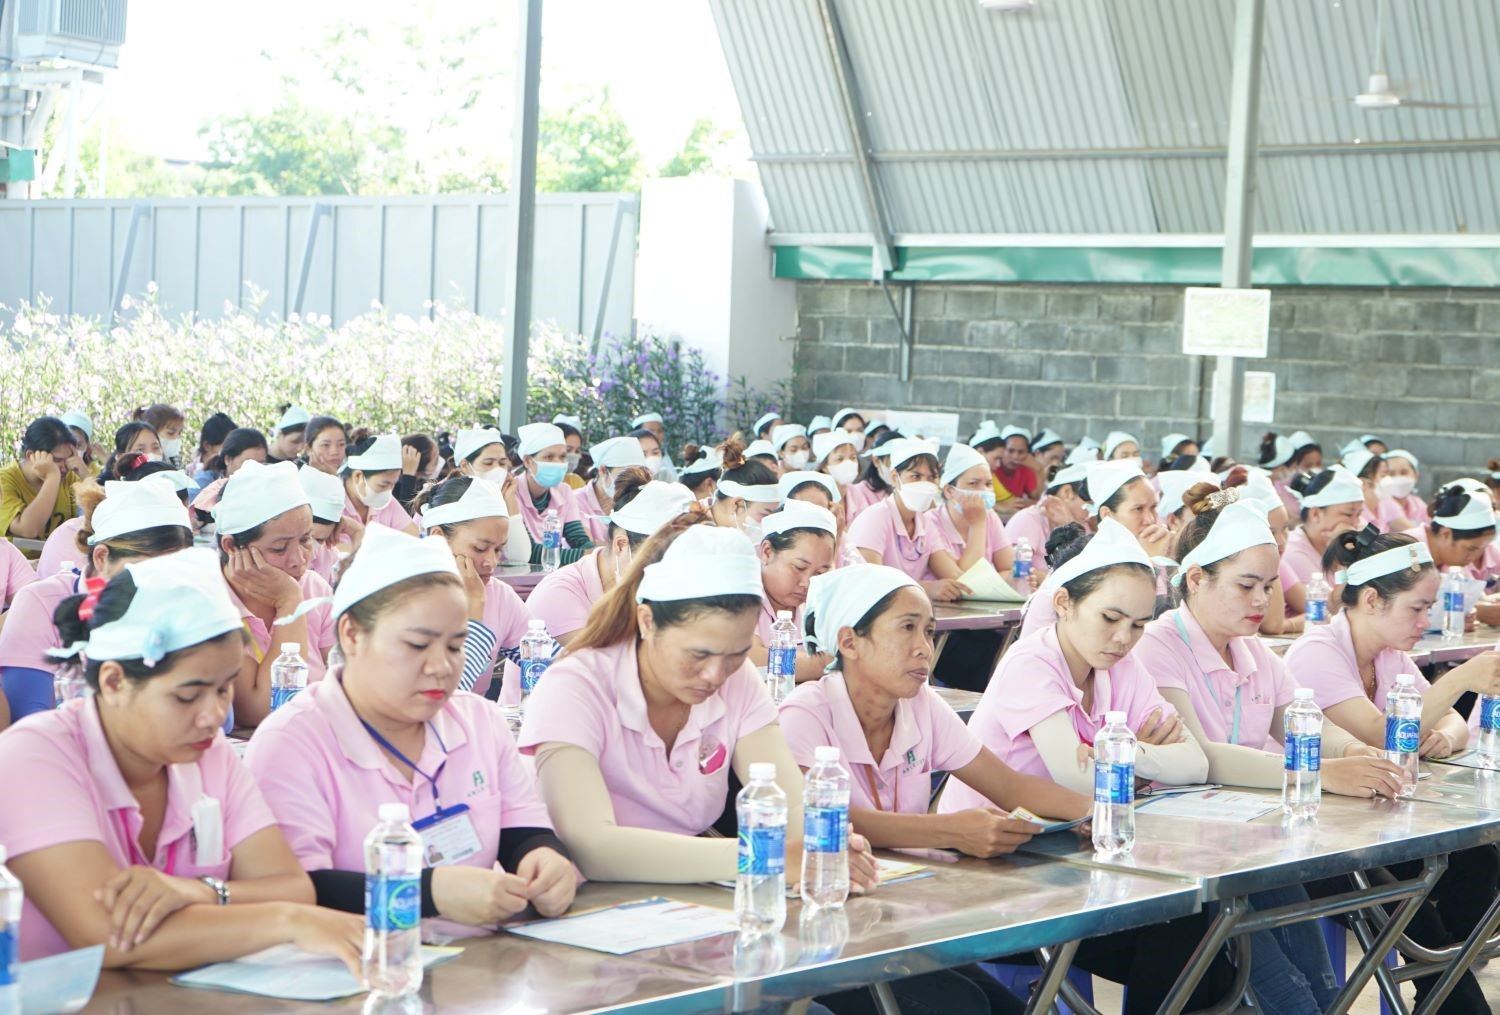 Dissemination of labor insurance policies and laws among Labor Union members and workers